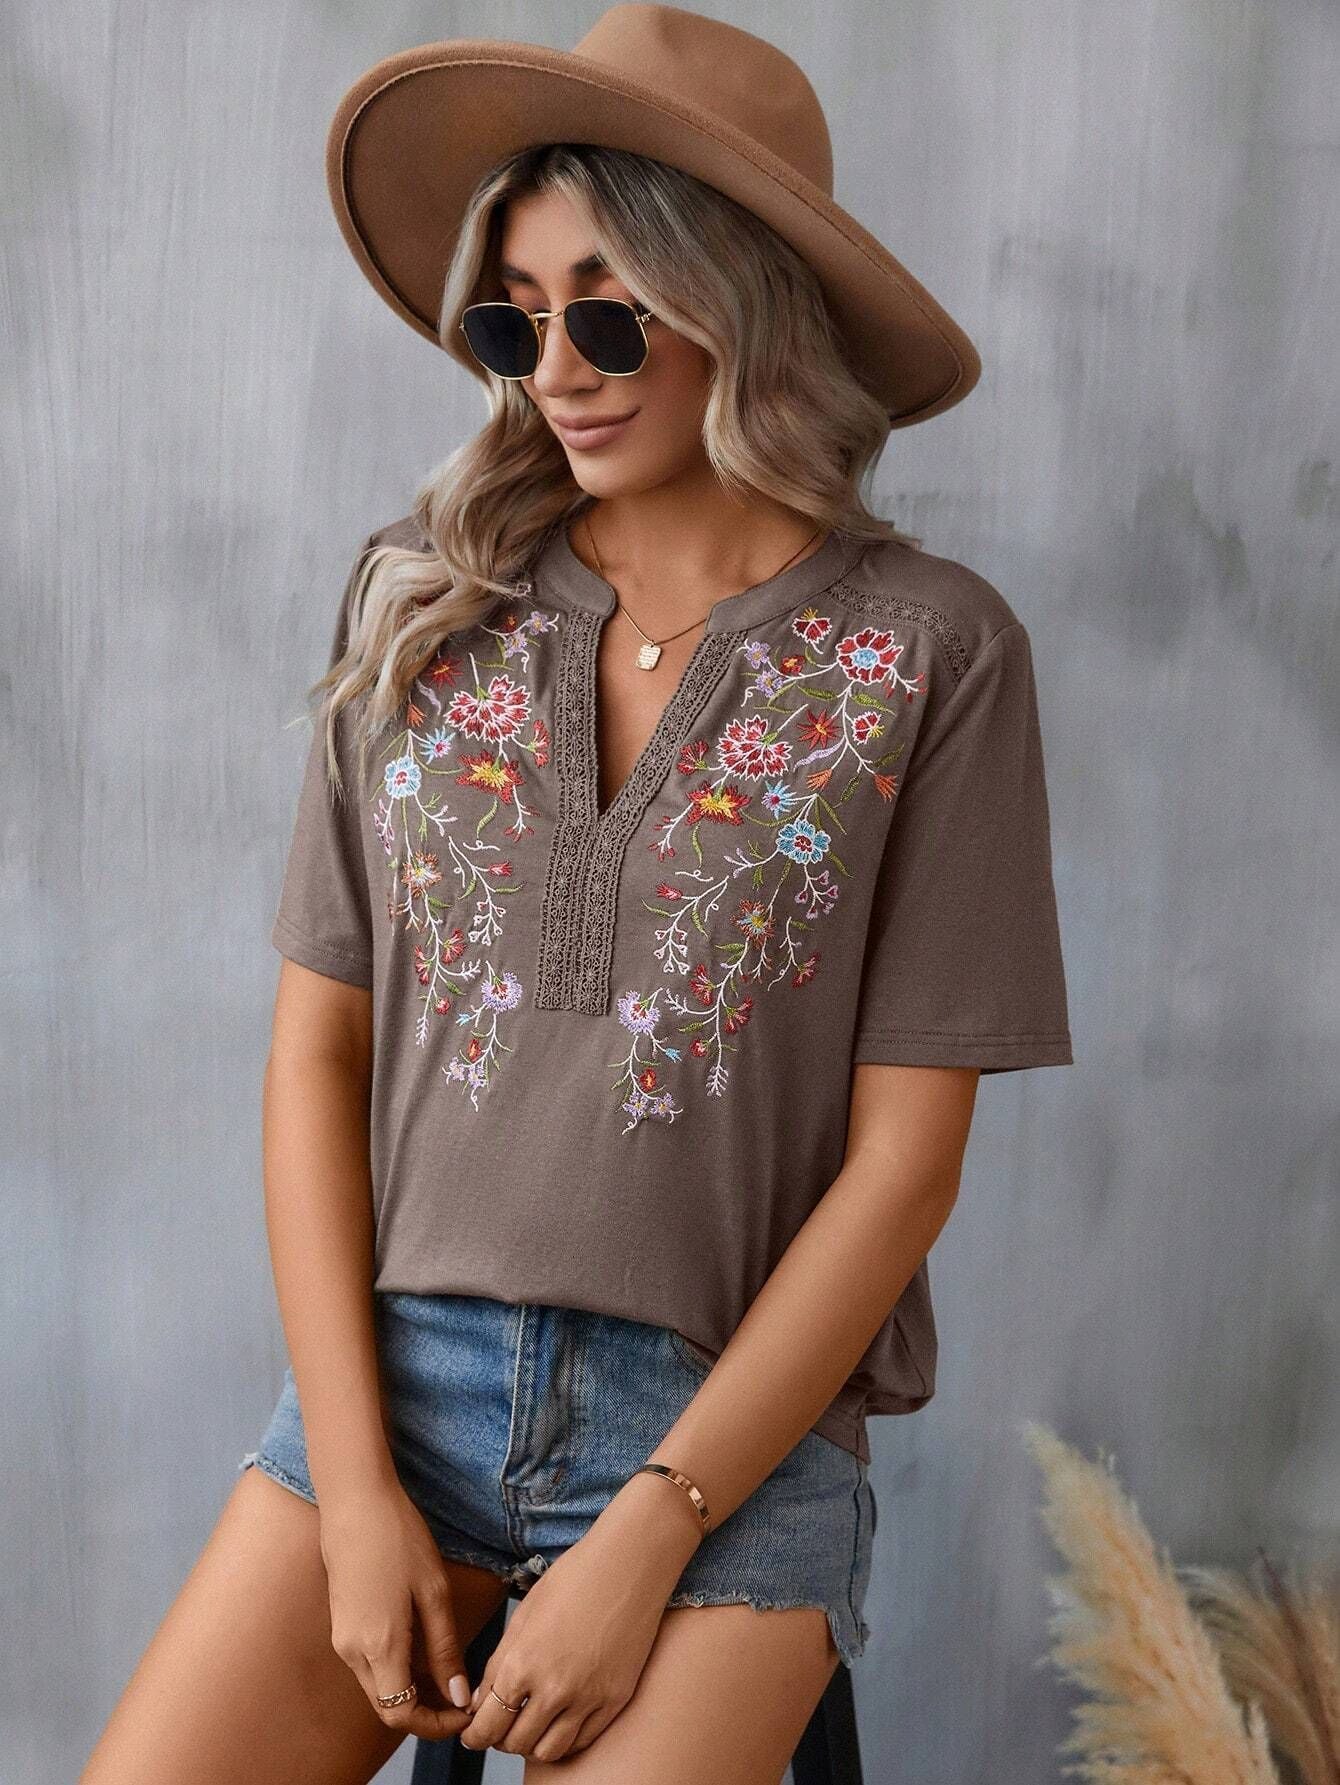 Women's Fashion Lace-Collared Blouse with Embroidery Stitching